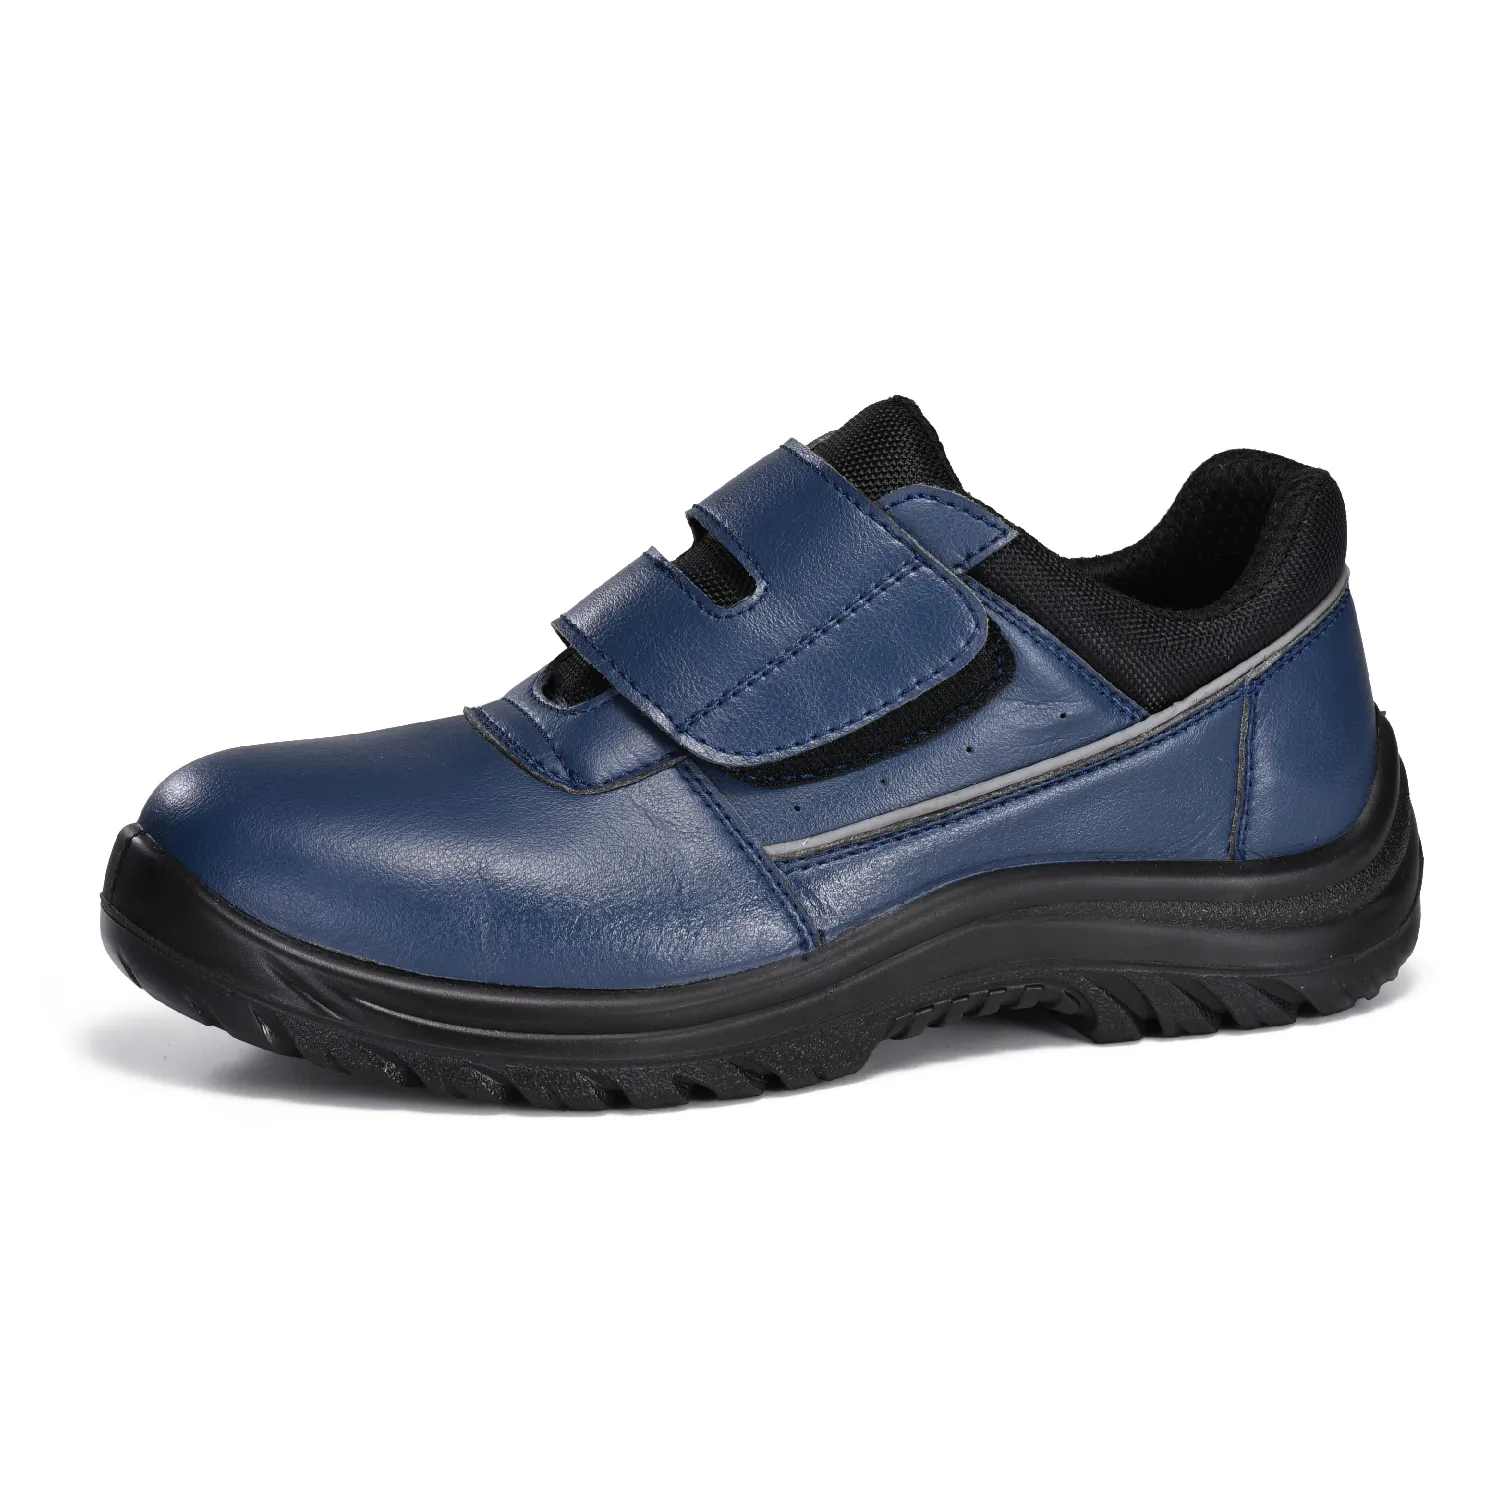 Safety Shoes Cheap Safety Shoes Online Shopping Safety Shoes Man